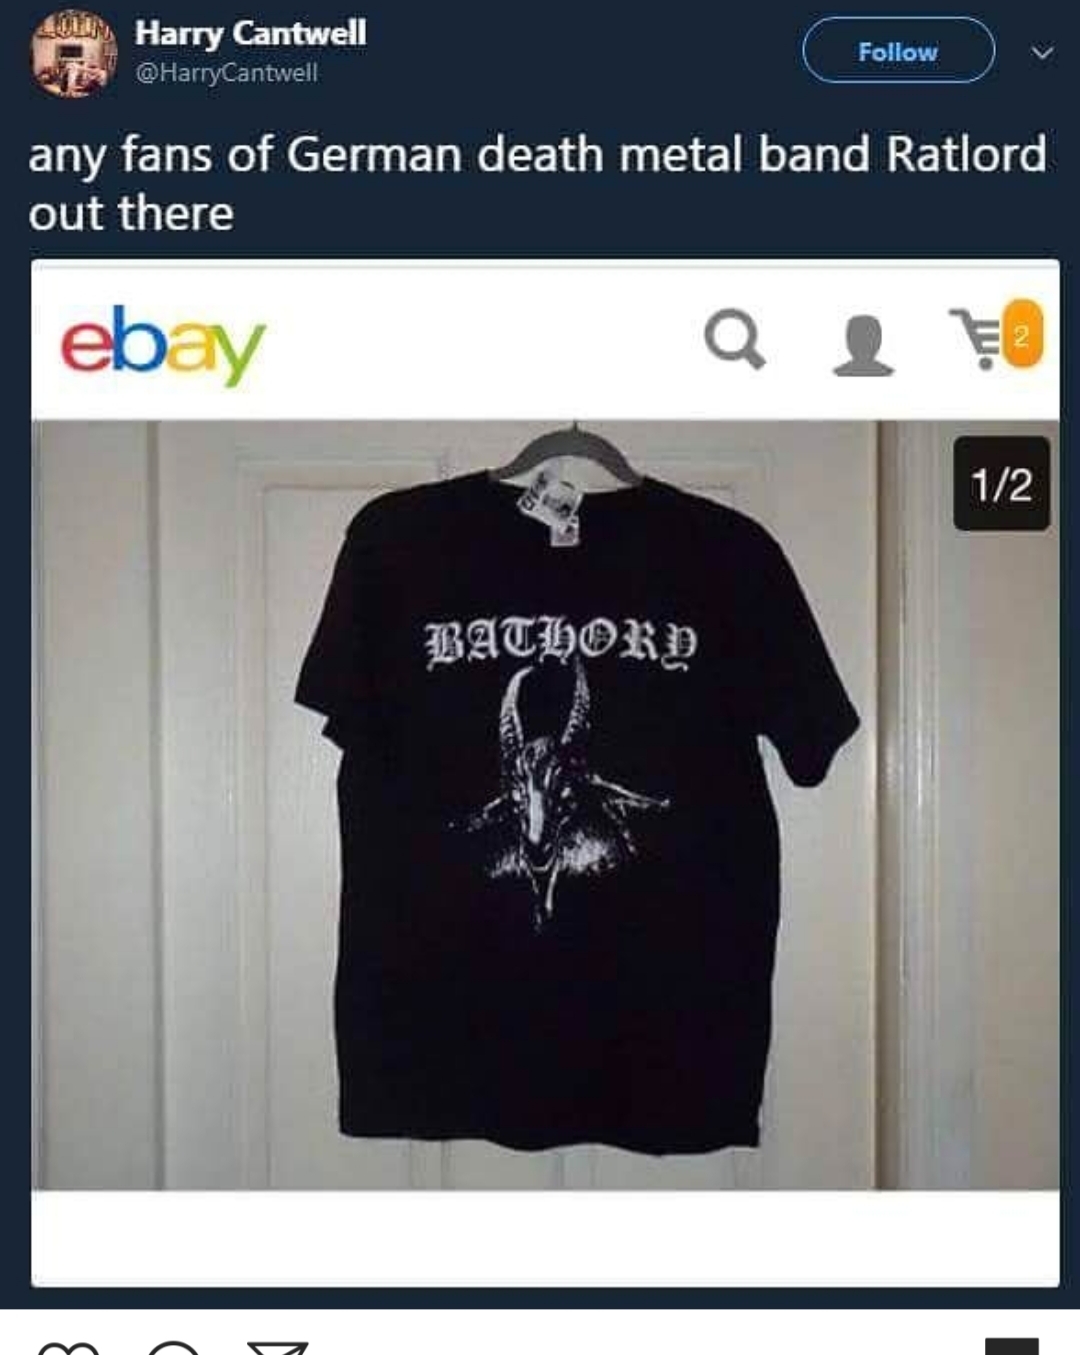 bathory ratlord - Son Harry Cantwell any fans of German death metal band Ratlord out there ebay 12 Bathord